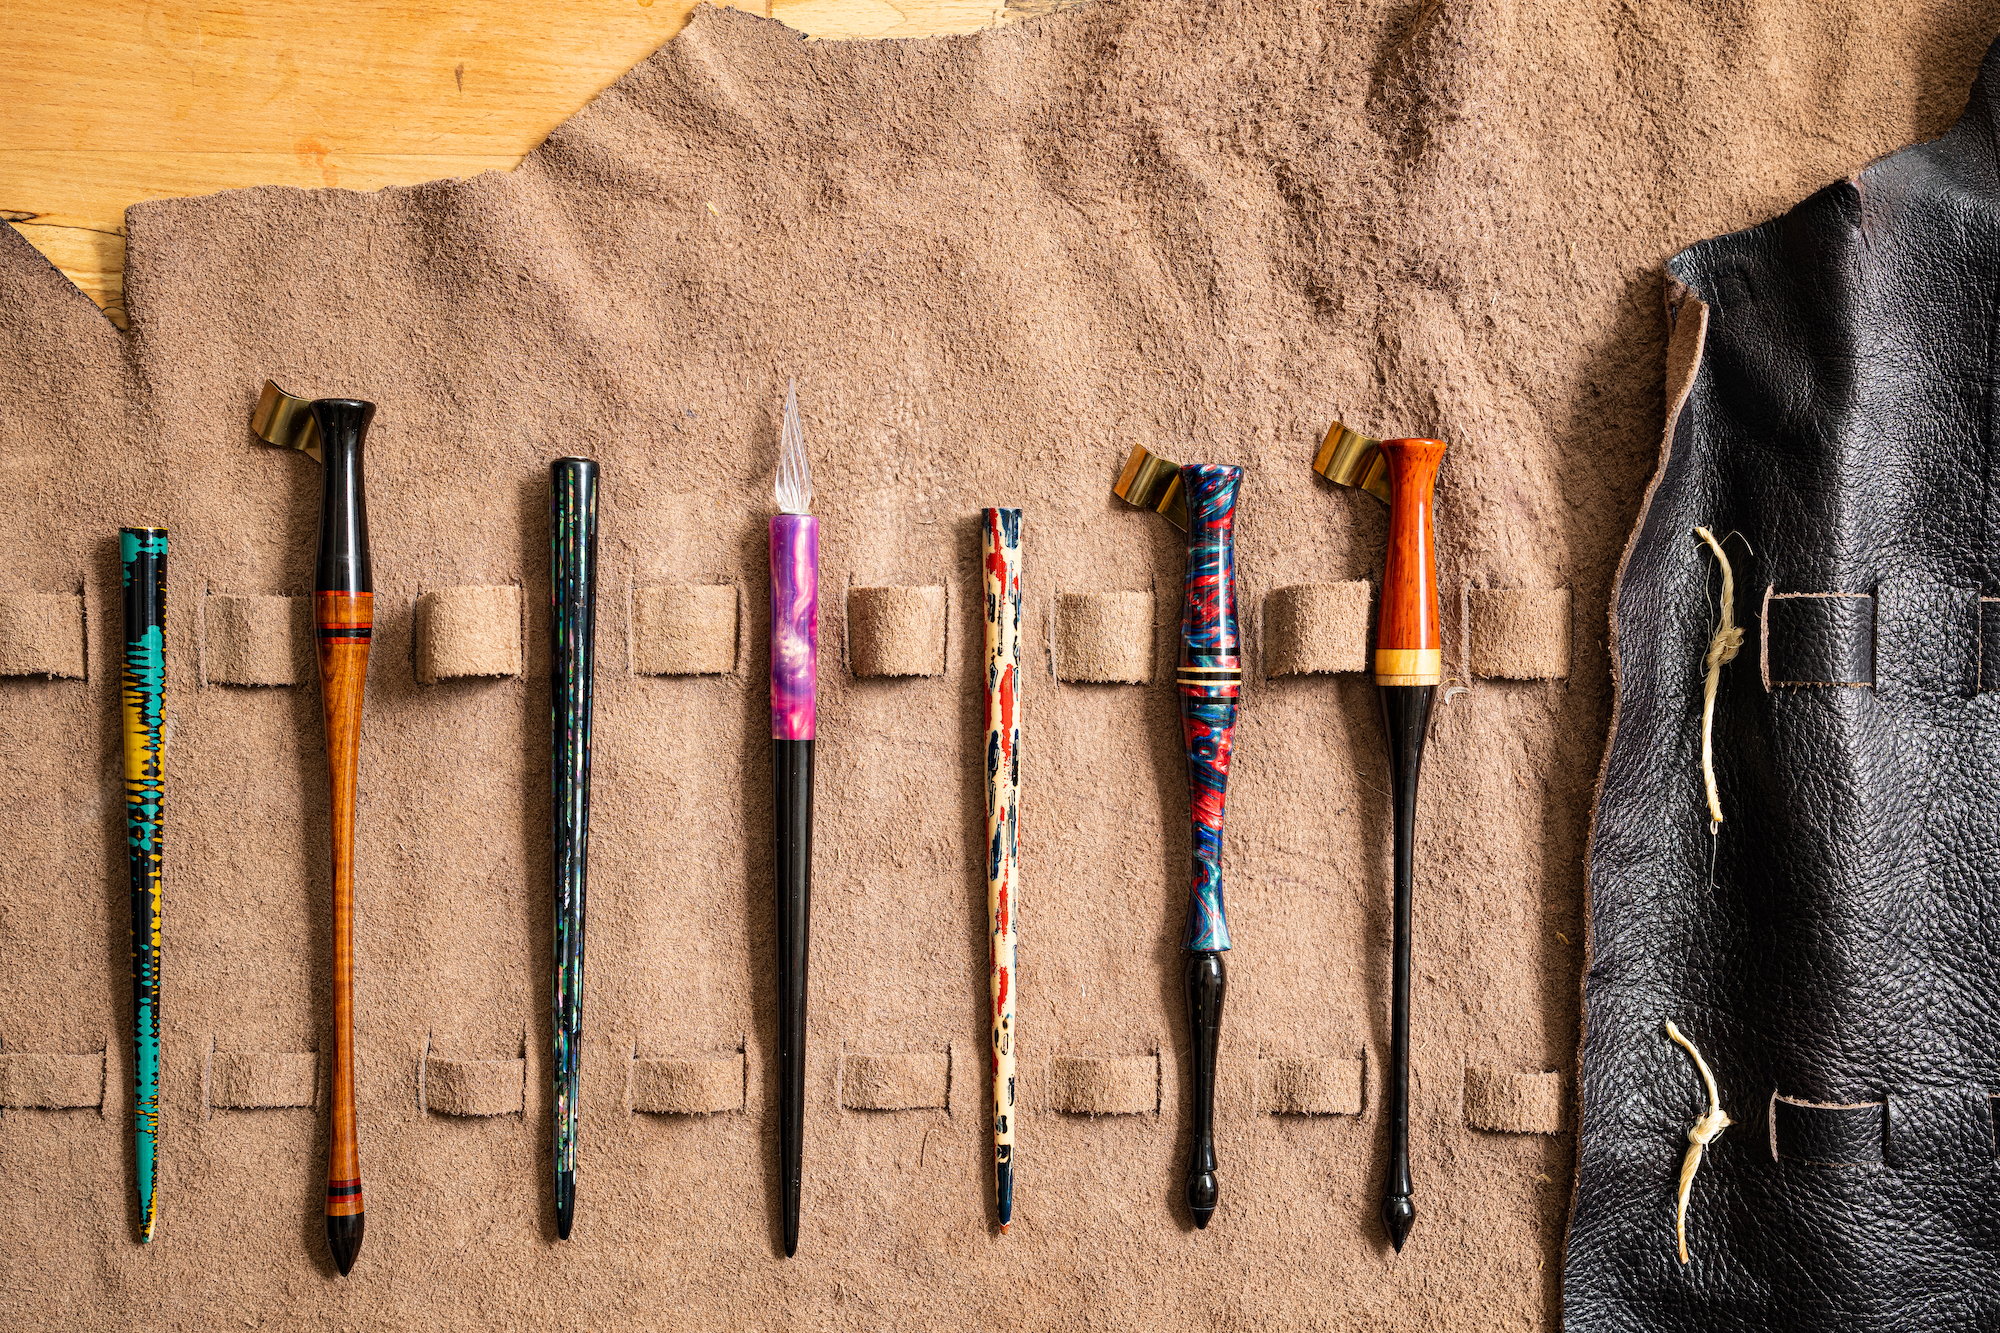 Hand-crafted and polished dip pens made by Silva